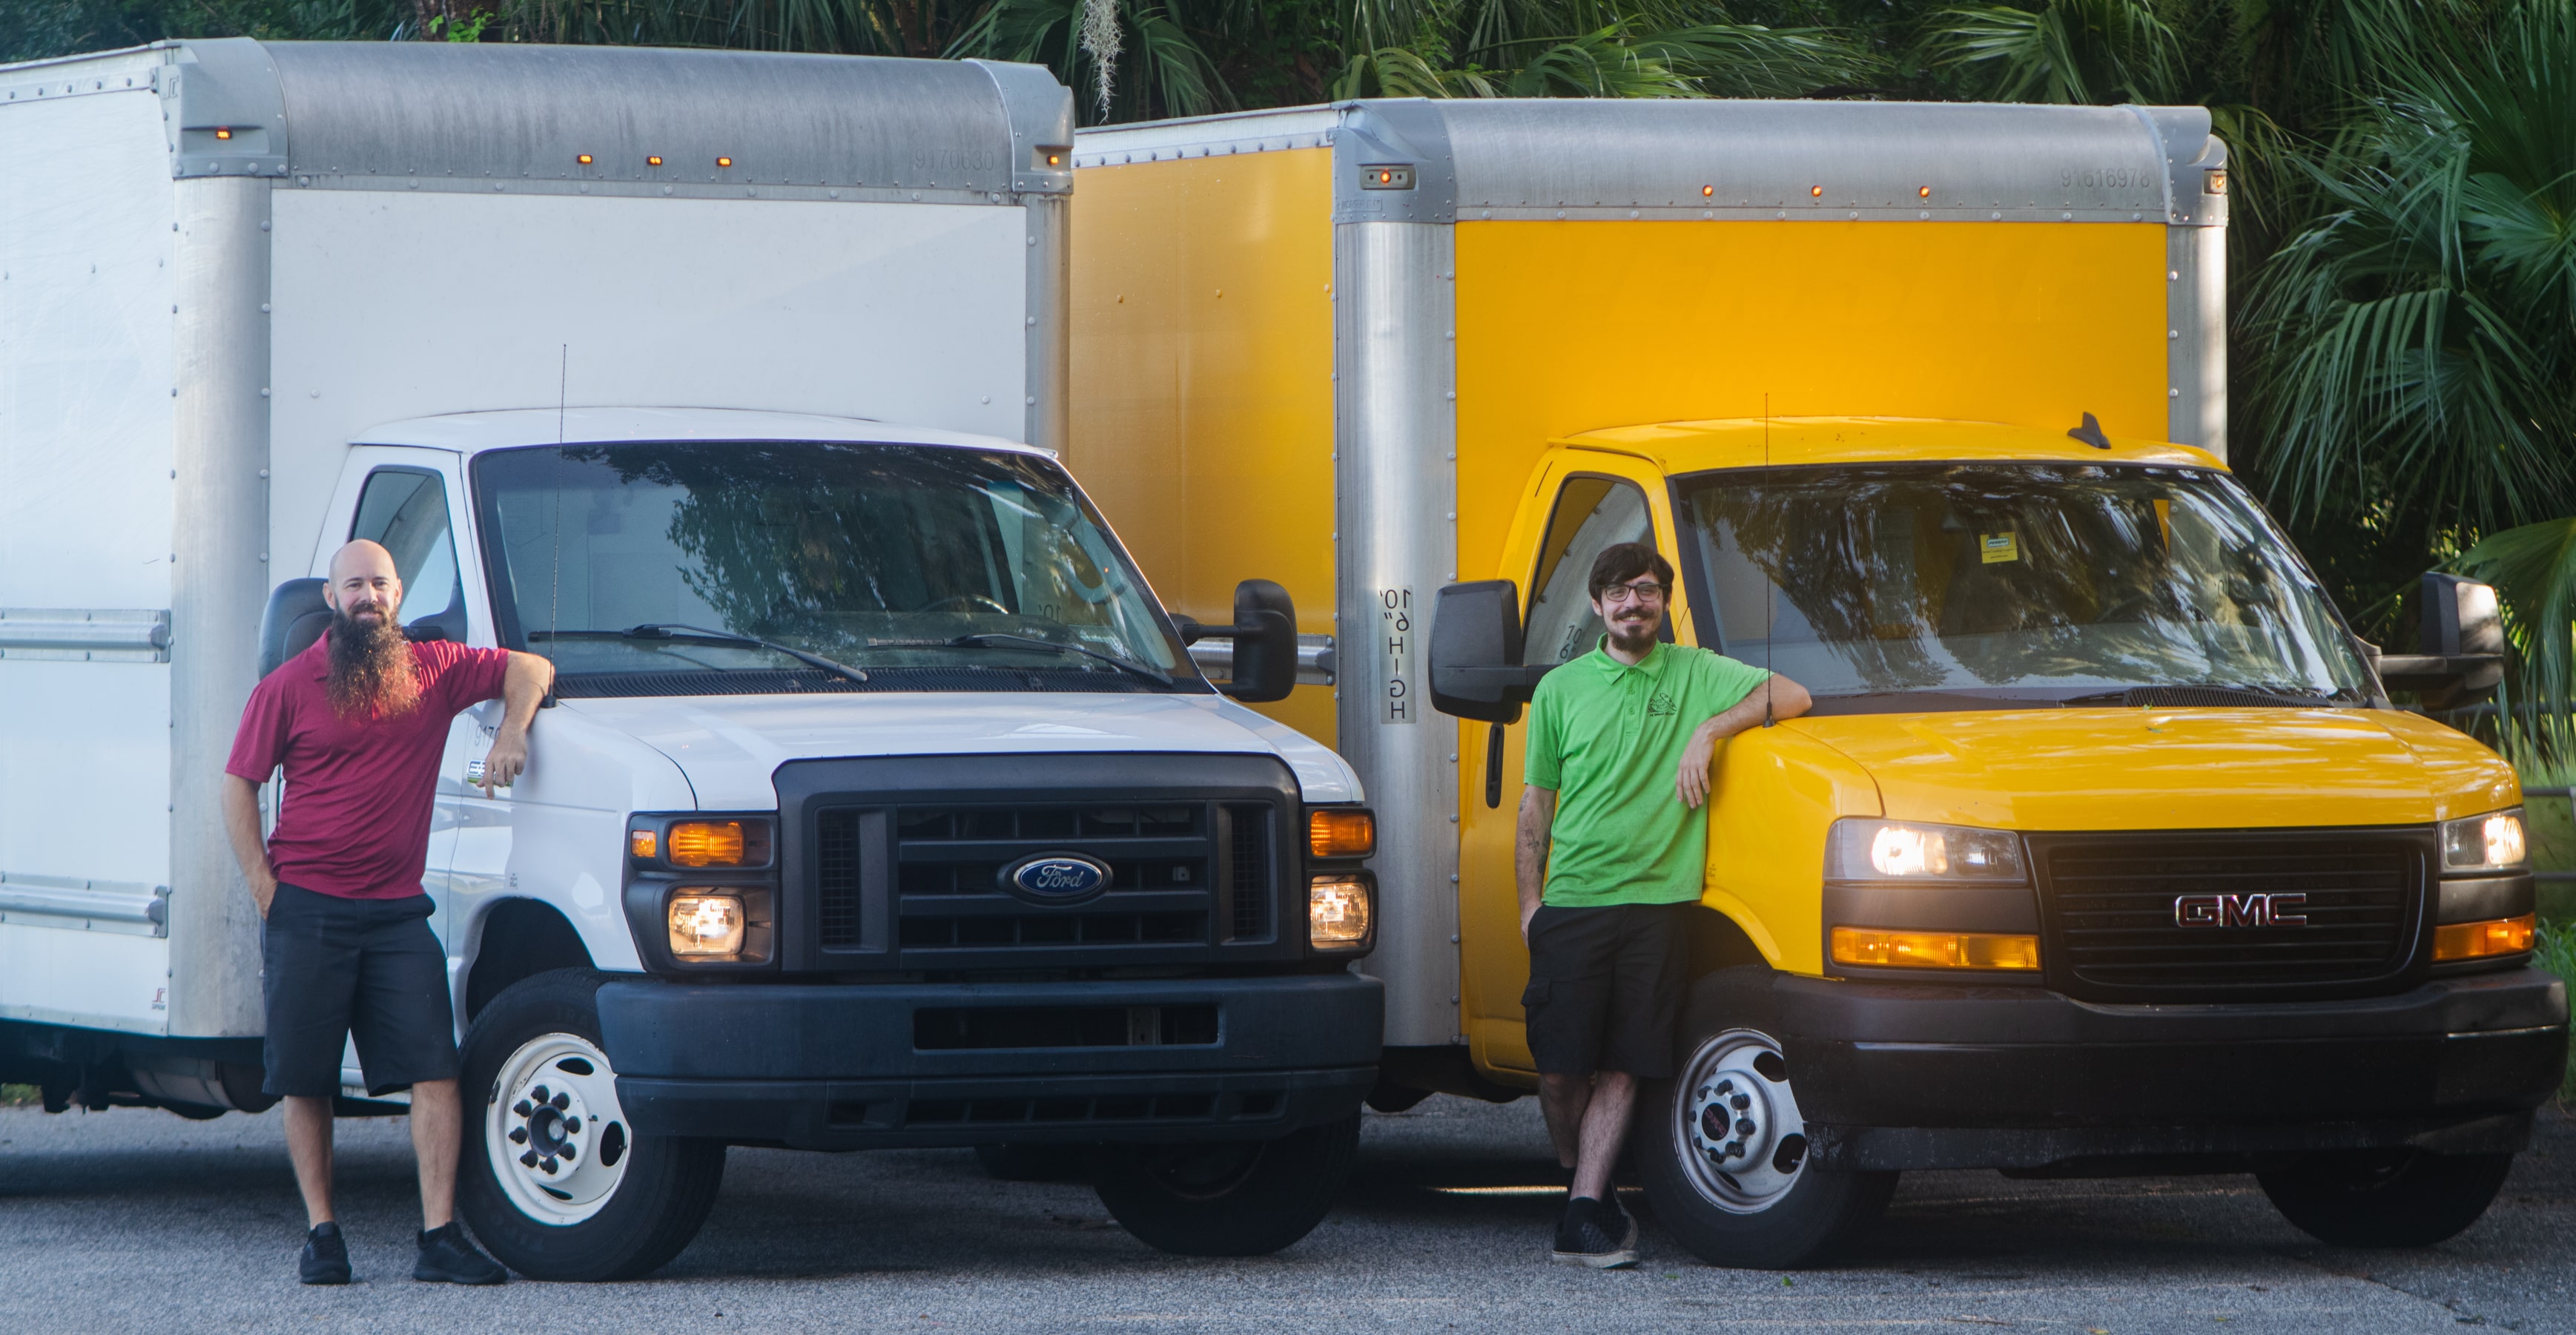 D.K. and Josh standing by their bread delivery trucks.